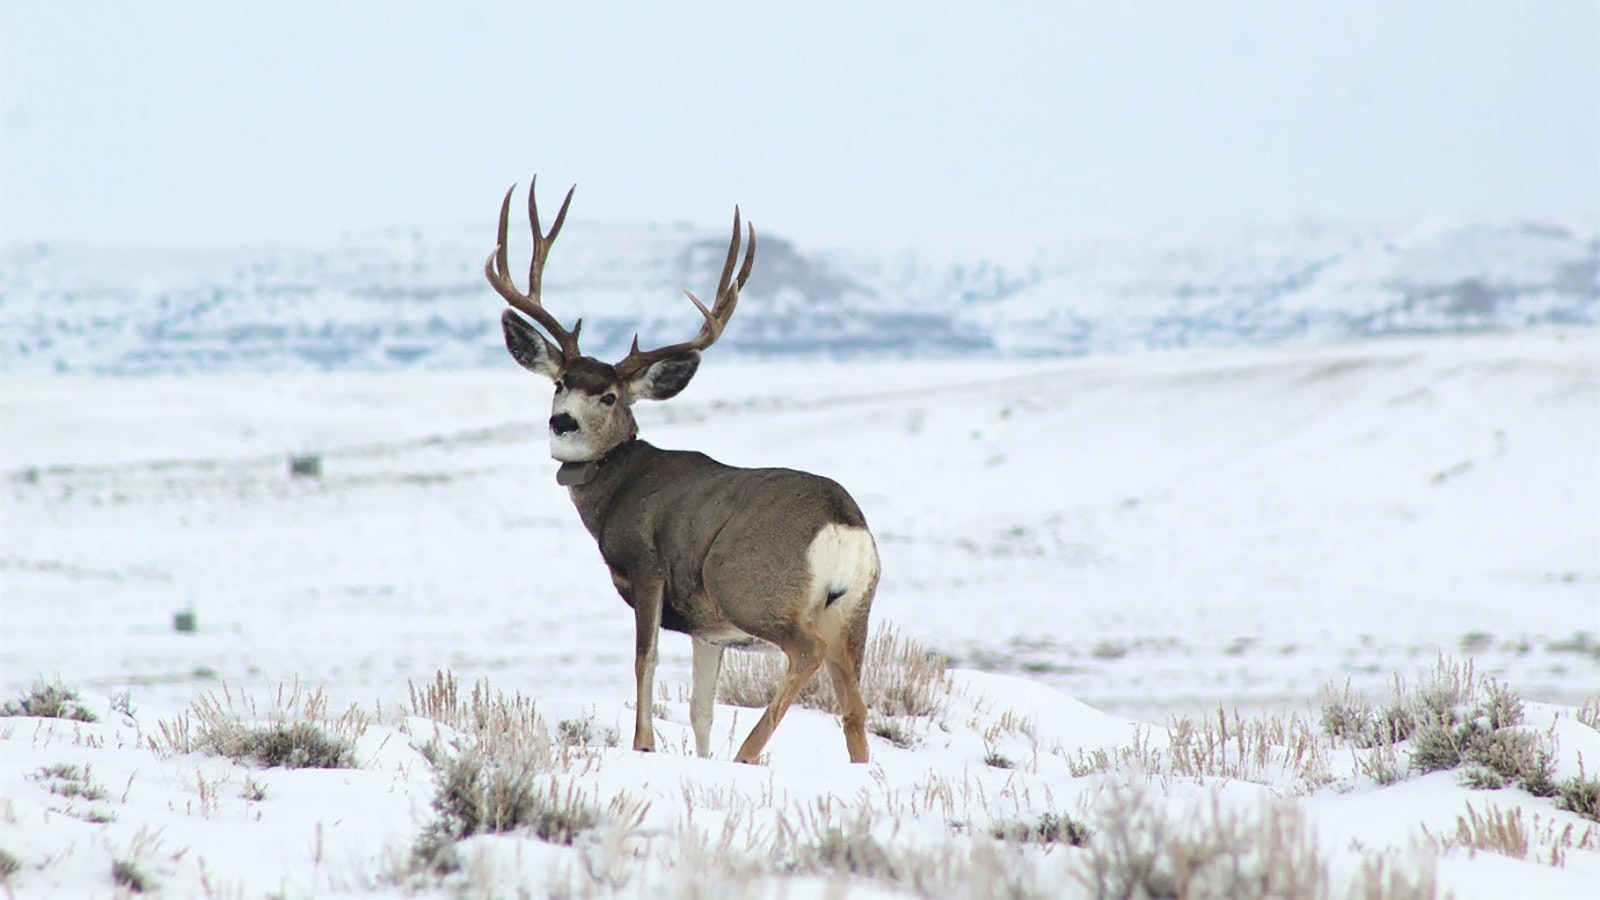 This mule deer buck was recently outfitted with a Wyoming Game and Fish Department radio collar in the Upper Green River Basin, one of the areas hardest hit by winterkill.